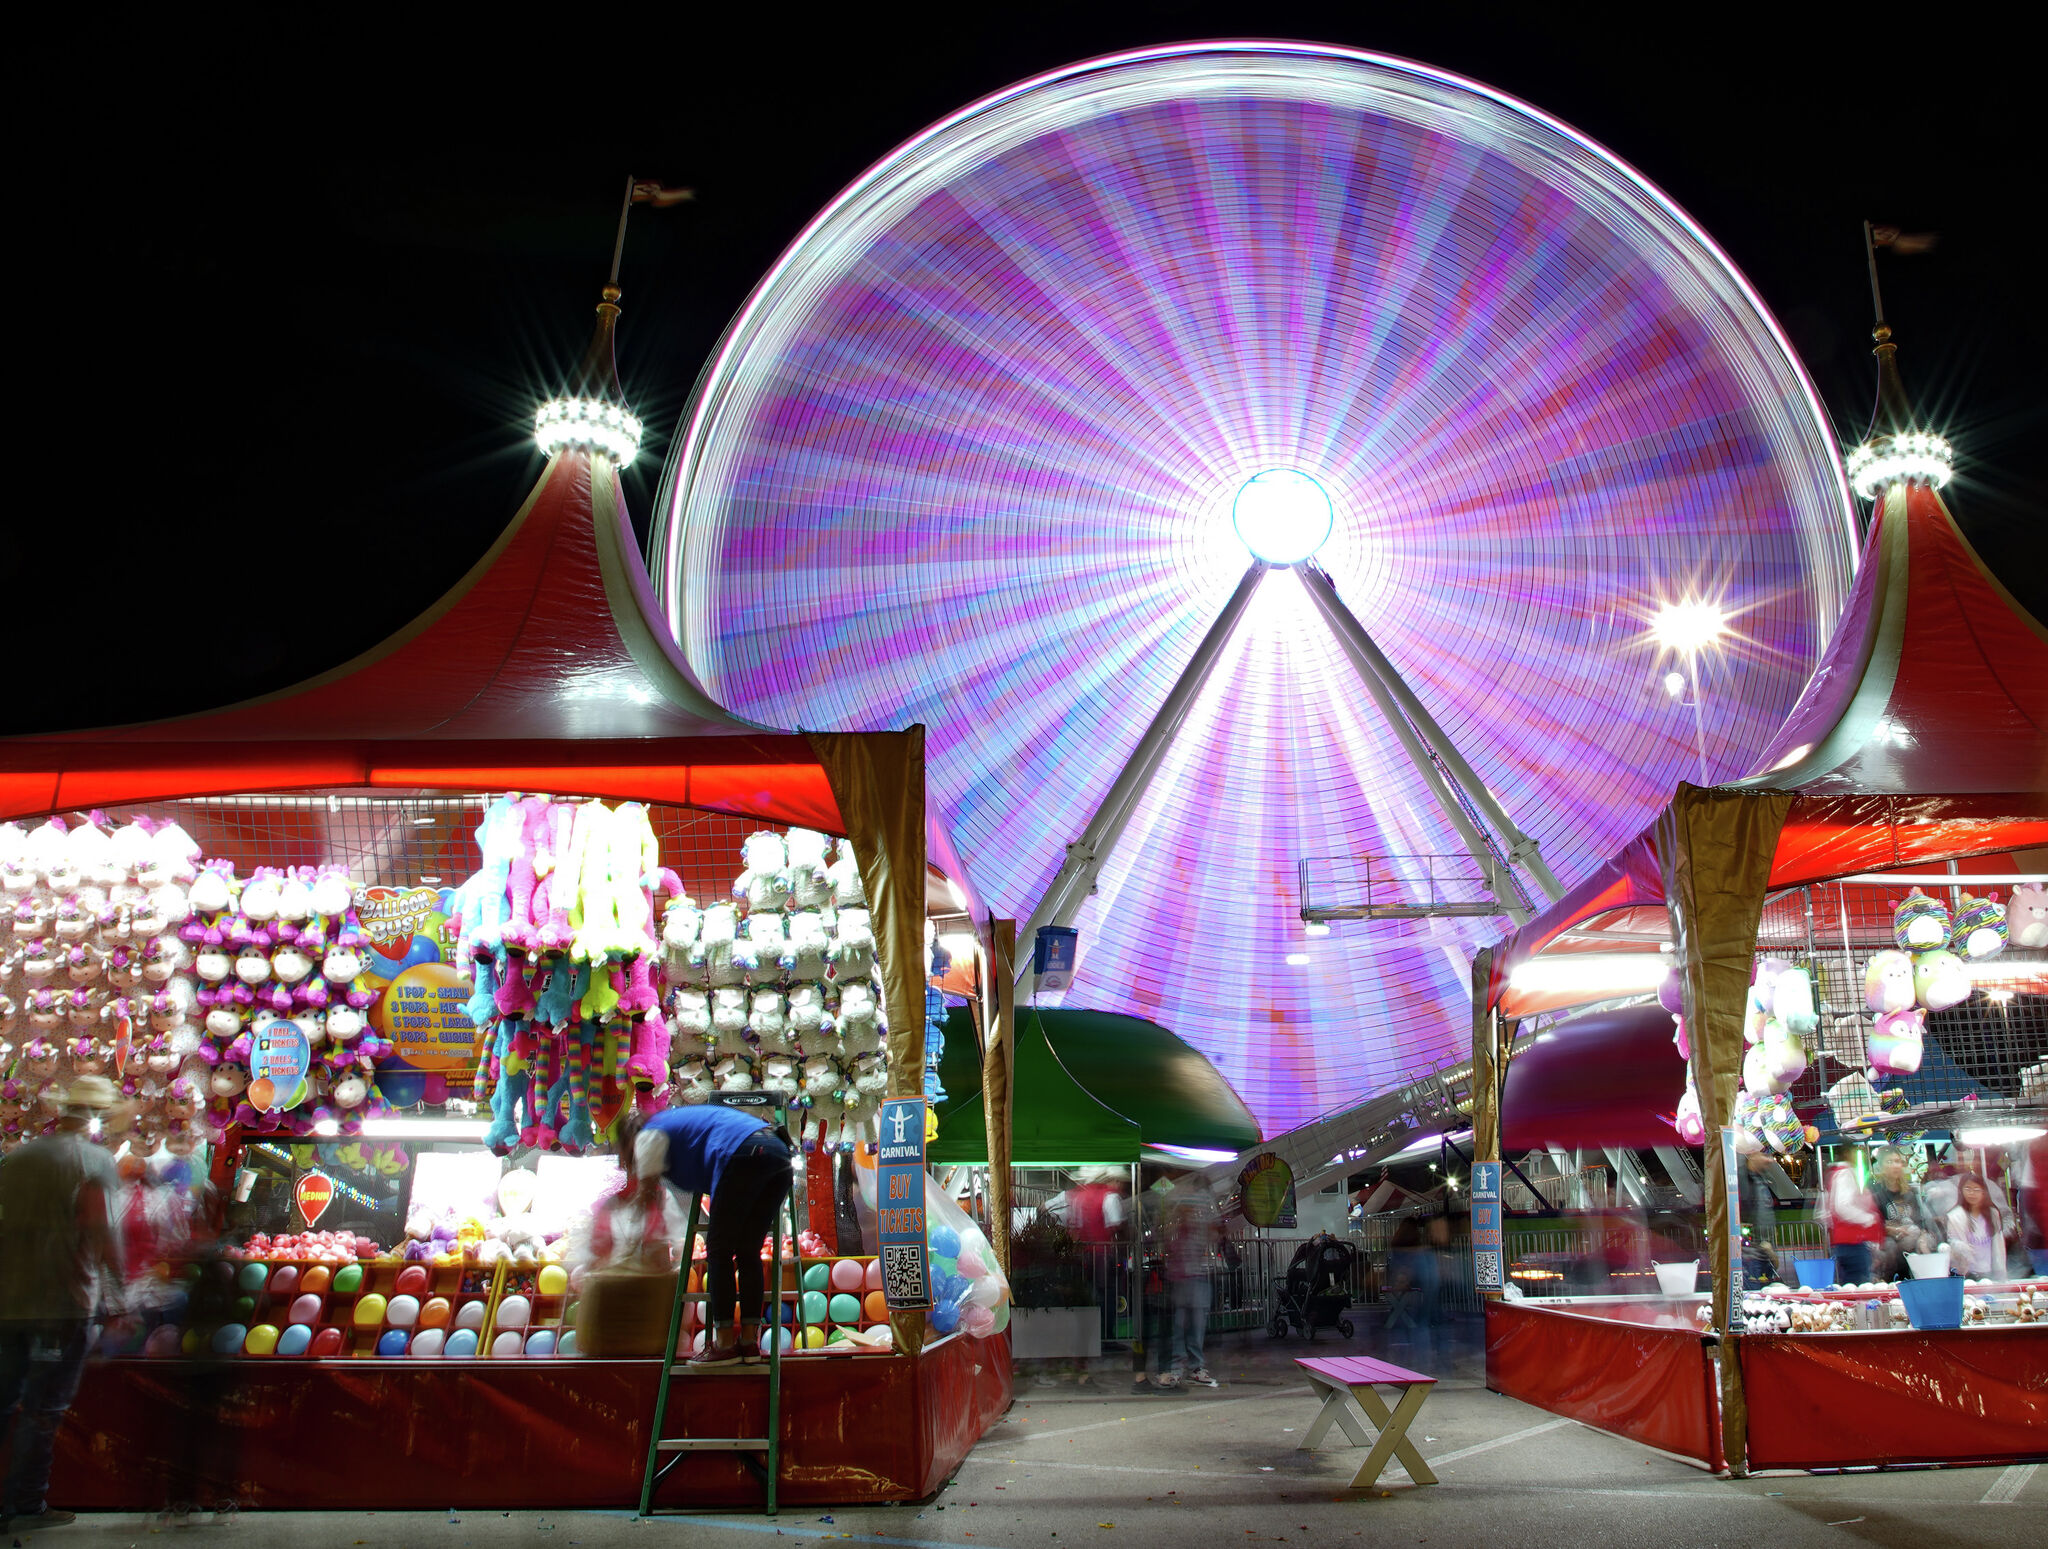 Halfpriced Houston Rodeo carnival tickets available for preorder